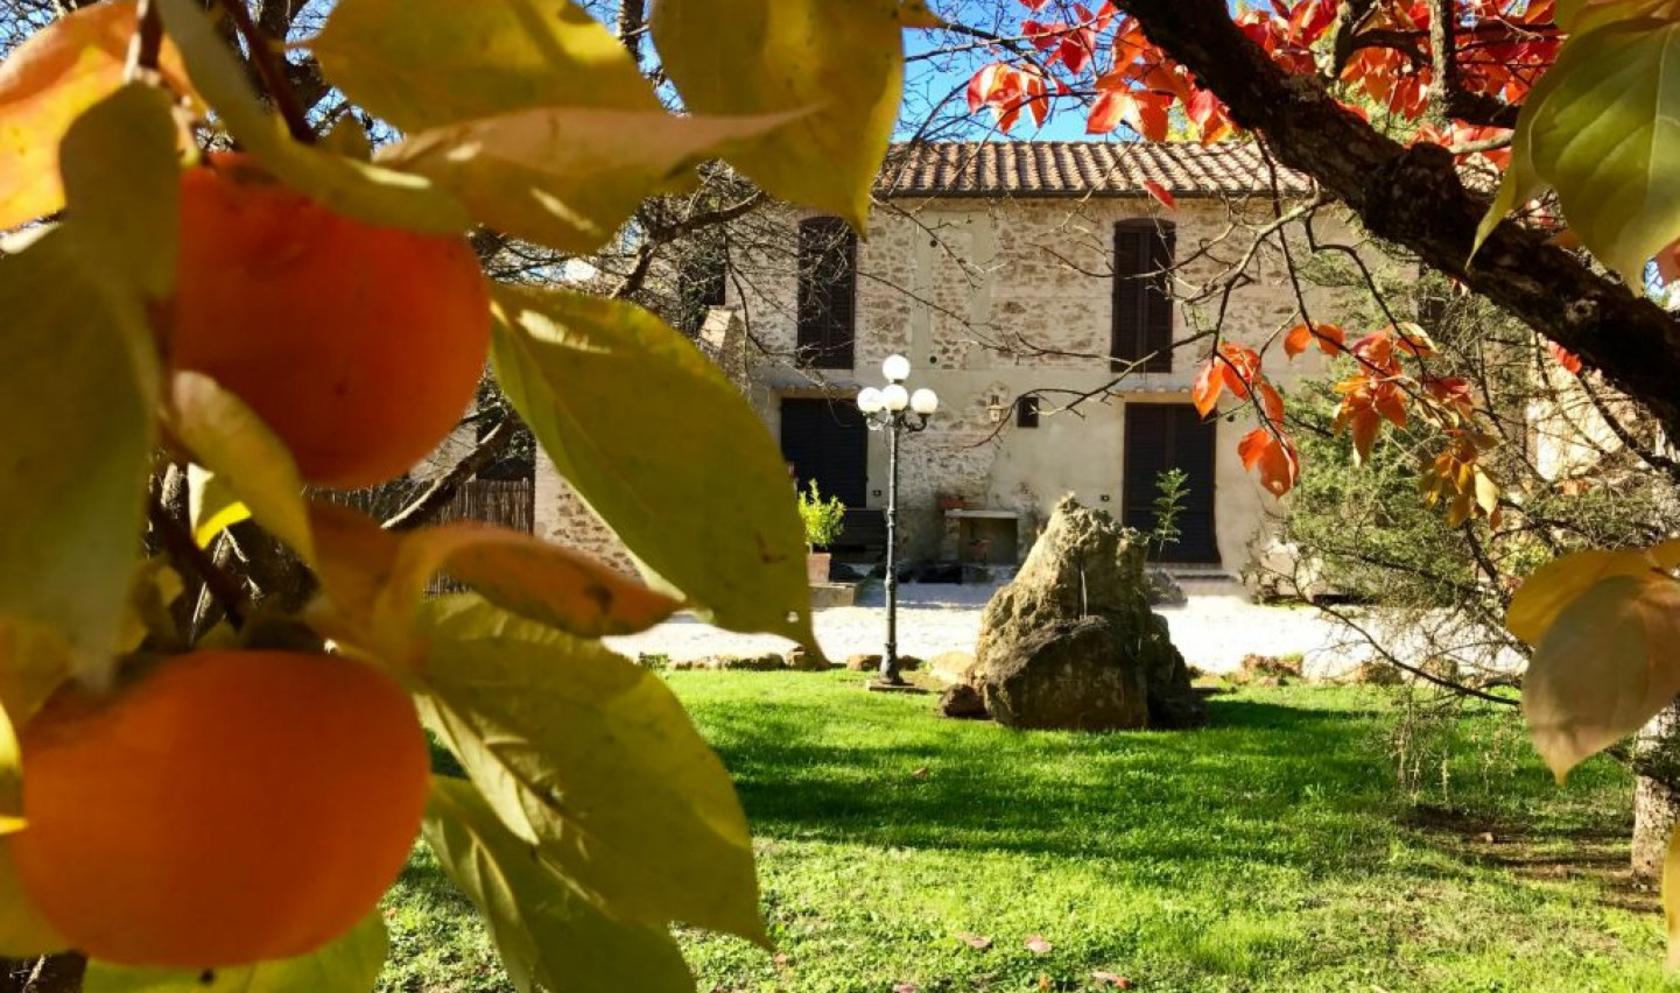 Toscana Immobiliare - The property consists of four stone faceted buildings of a total of 1600 sqm with spacious relax area, pool, gardens, pine forests, groves and orchards